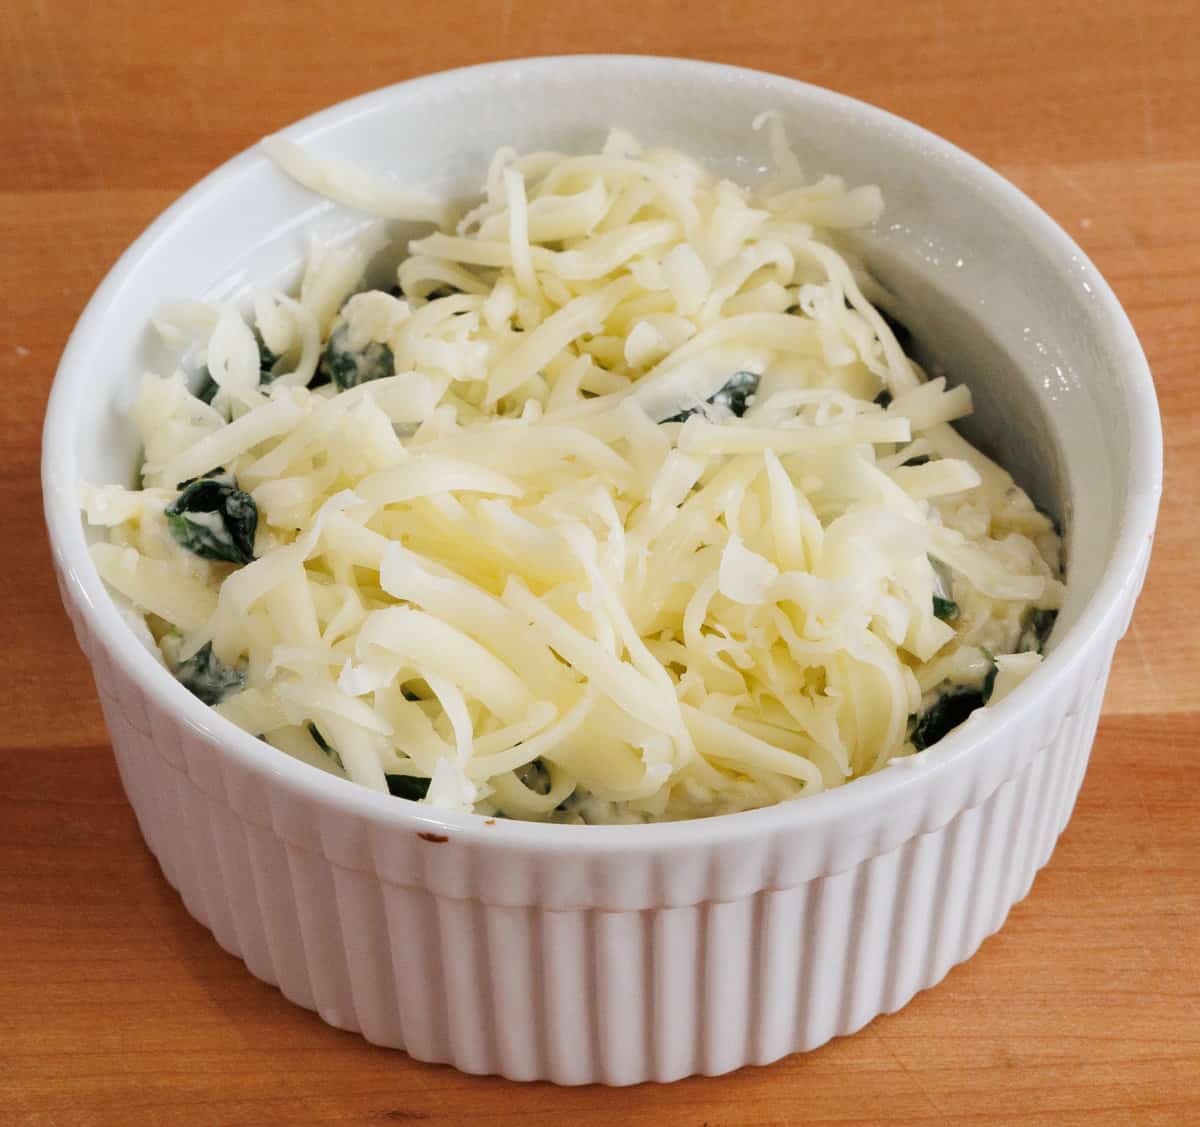 unbaked spinach in a ramekin on a wooden table.